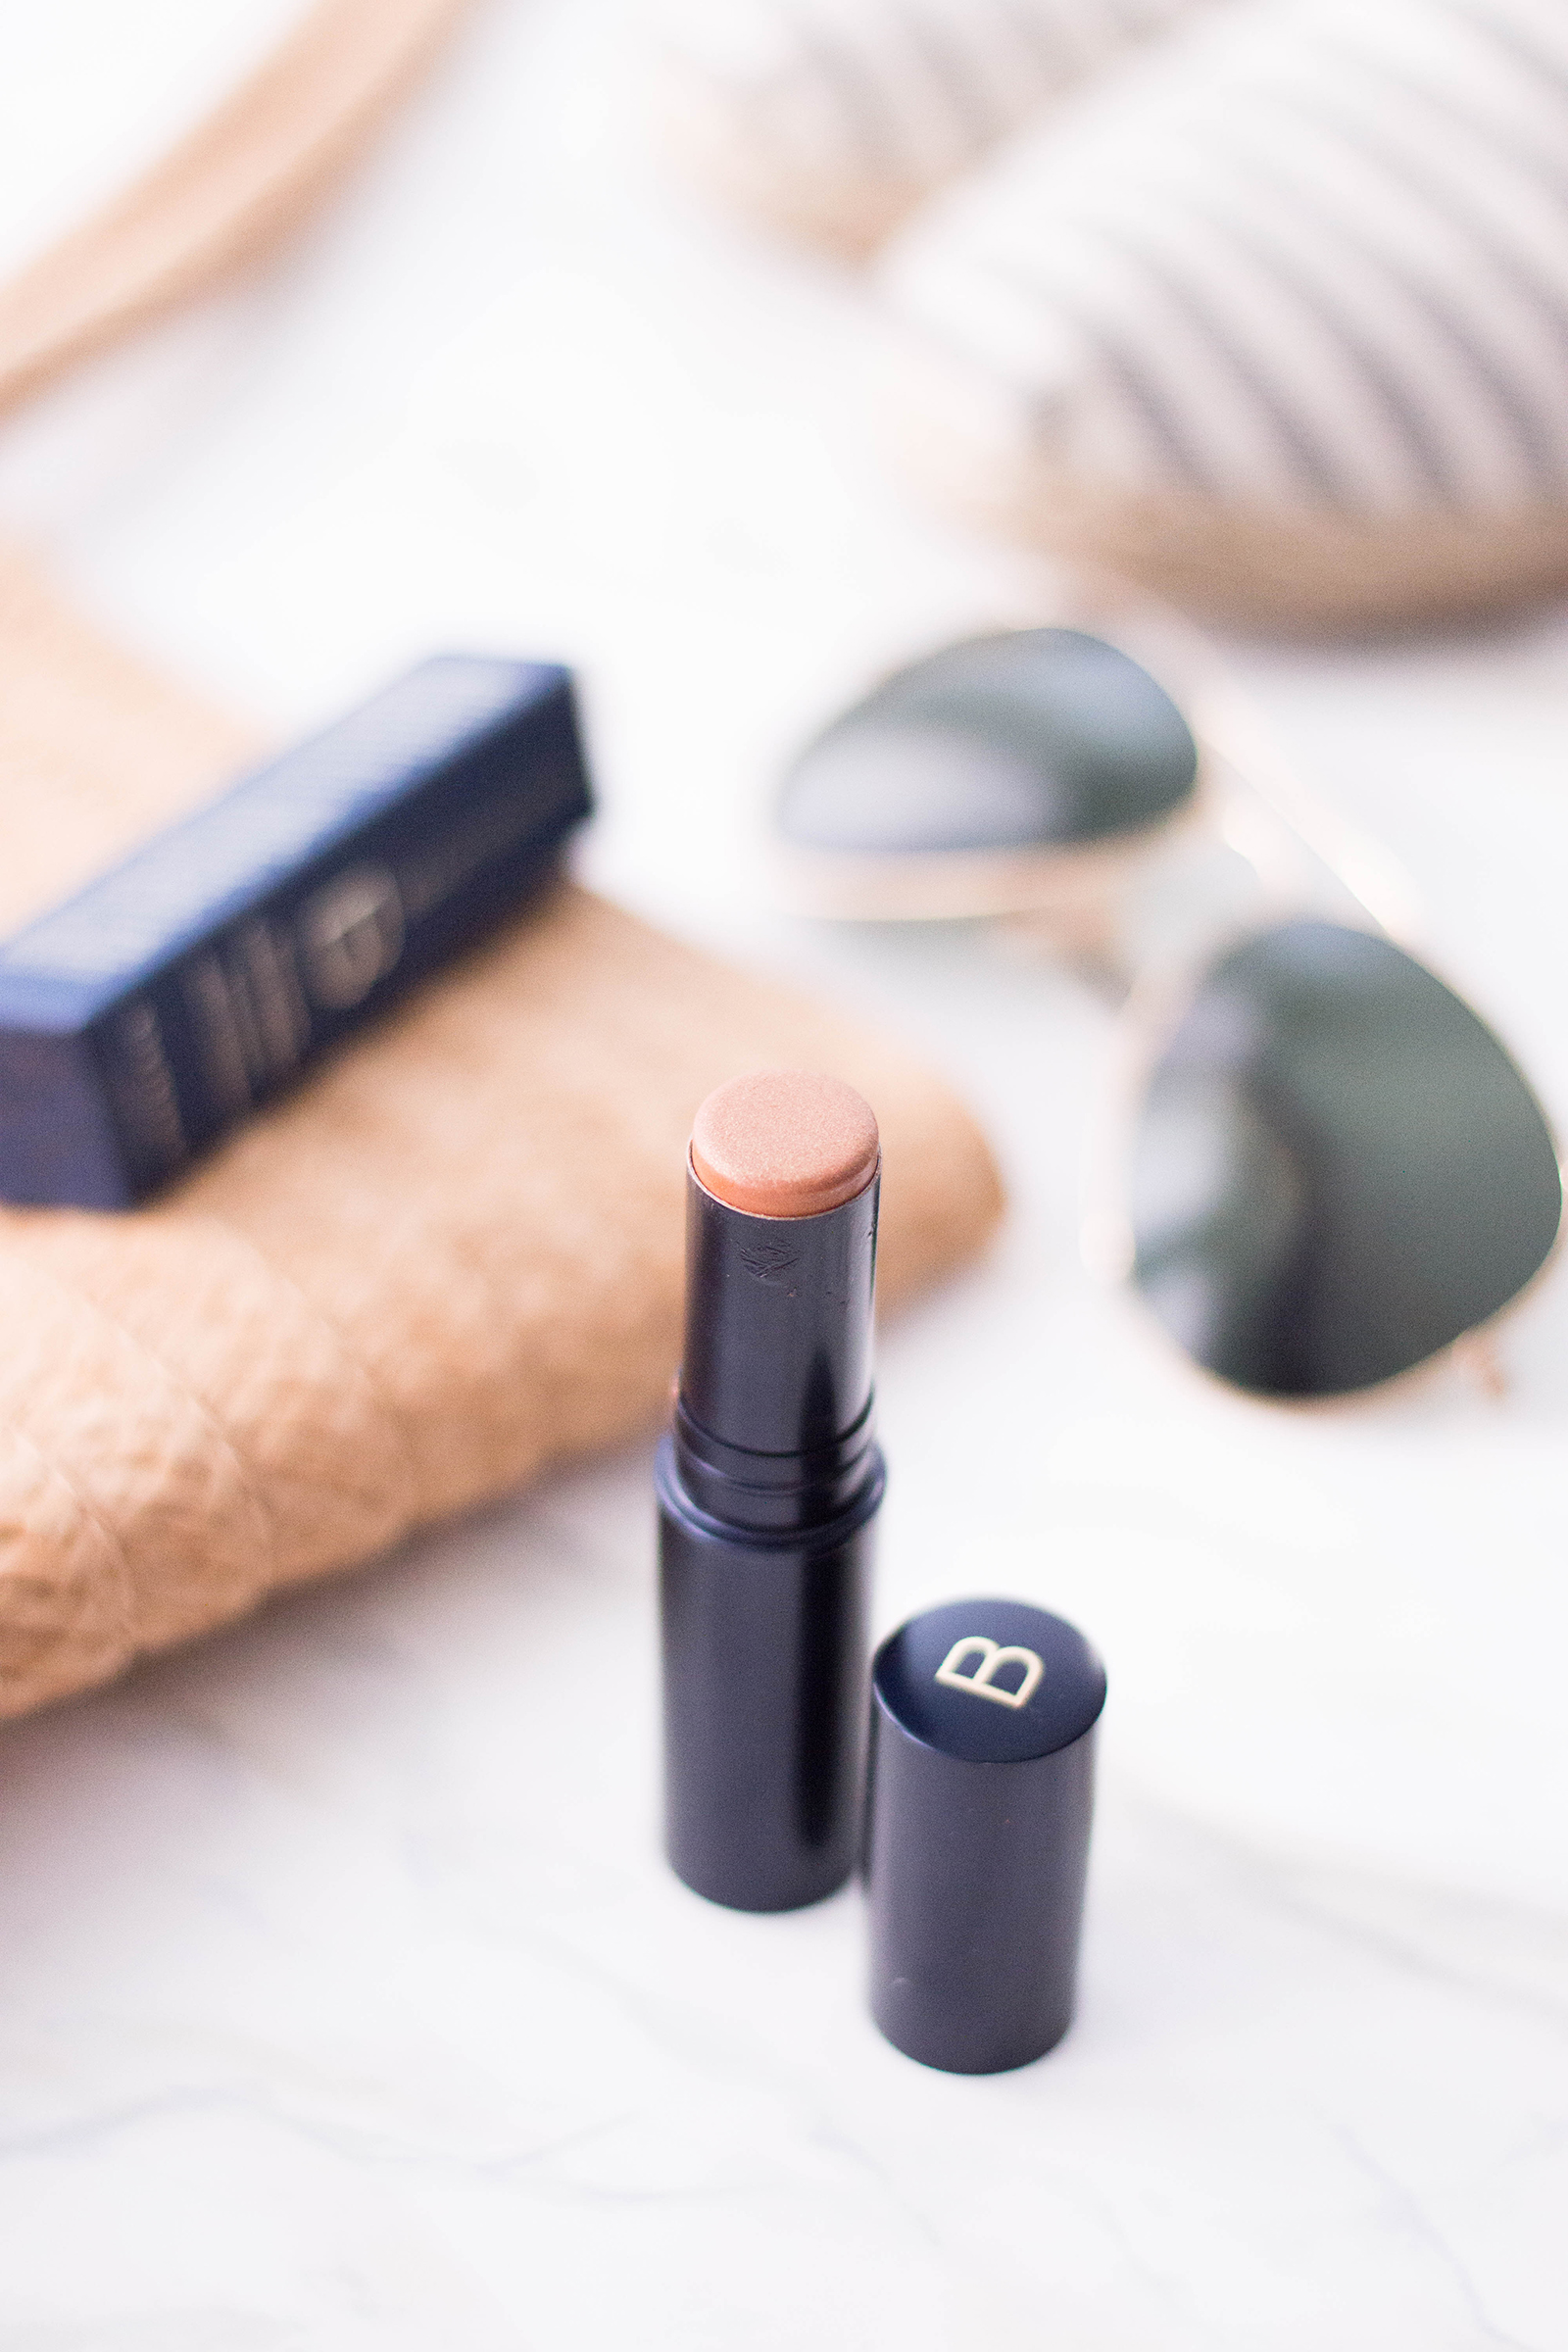 Maintaining a summer glow can be easy and safe with Beautycounter